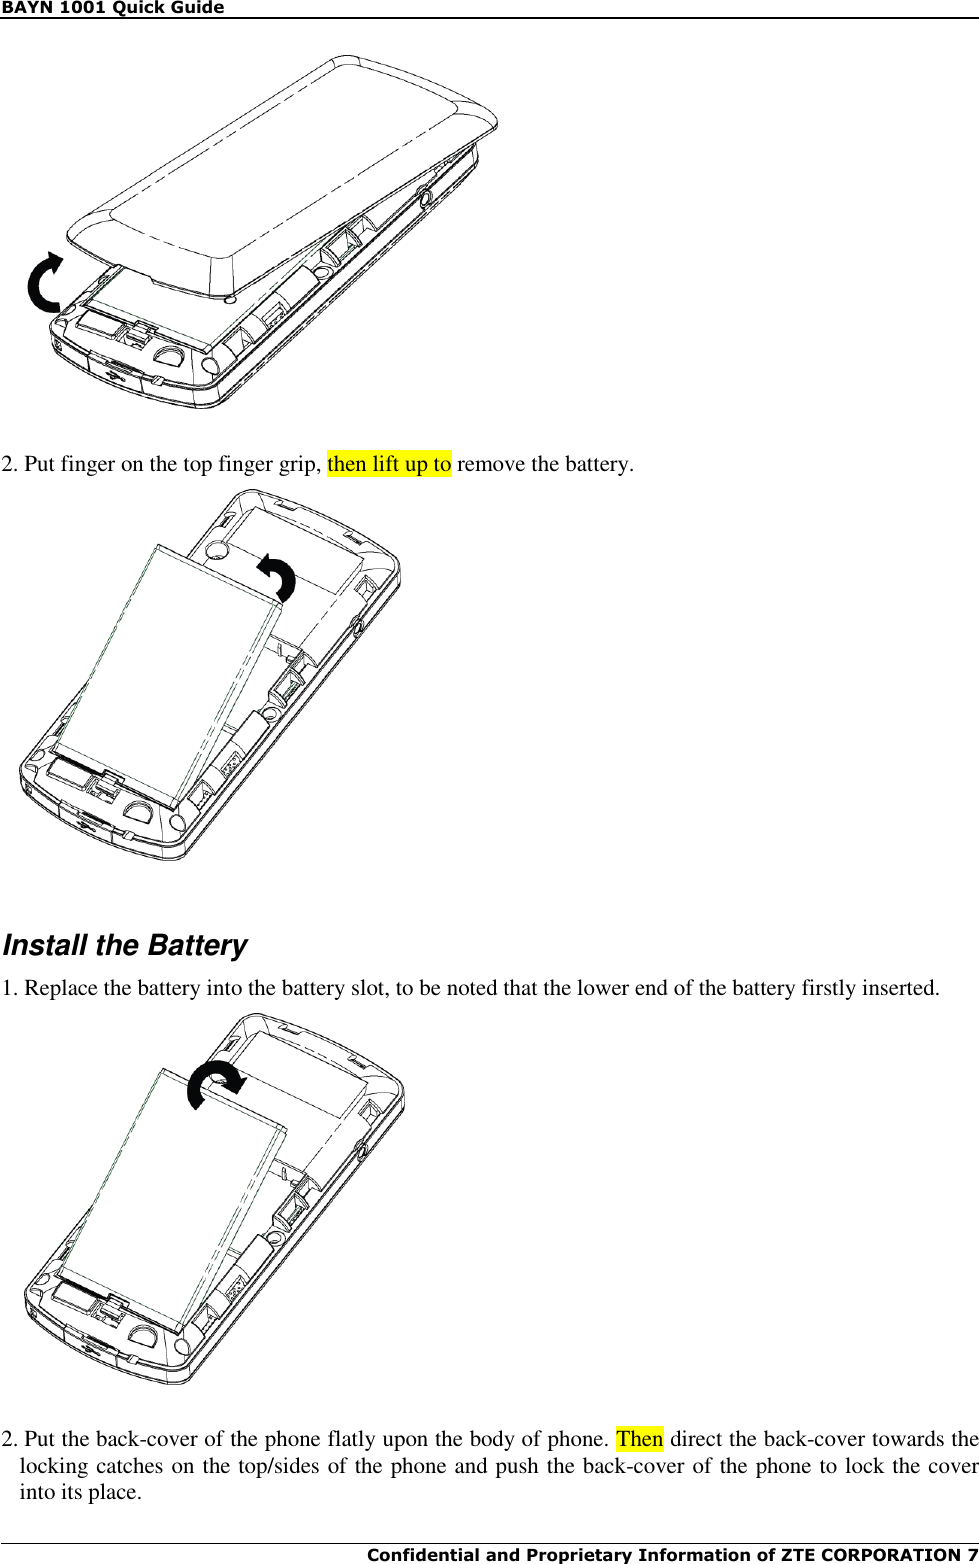 BAYN 1001 Quick Guide  Confidential and Proprietary Information of ZTE CORPORATION 7       2. Put finger on the top finger grip, then lift up to remove the battery.     Install the Battery 1. Replace the battery into the battery slot, to be noted that the lower end of the battery firstly inserted.    2. Put the back-cover of the phone flatly upon the body of phone. Then direct the back-cover towards the locking catches on the top/sides of the phone and push the back-cover of the phone to lock the cover into its place. 